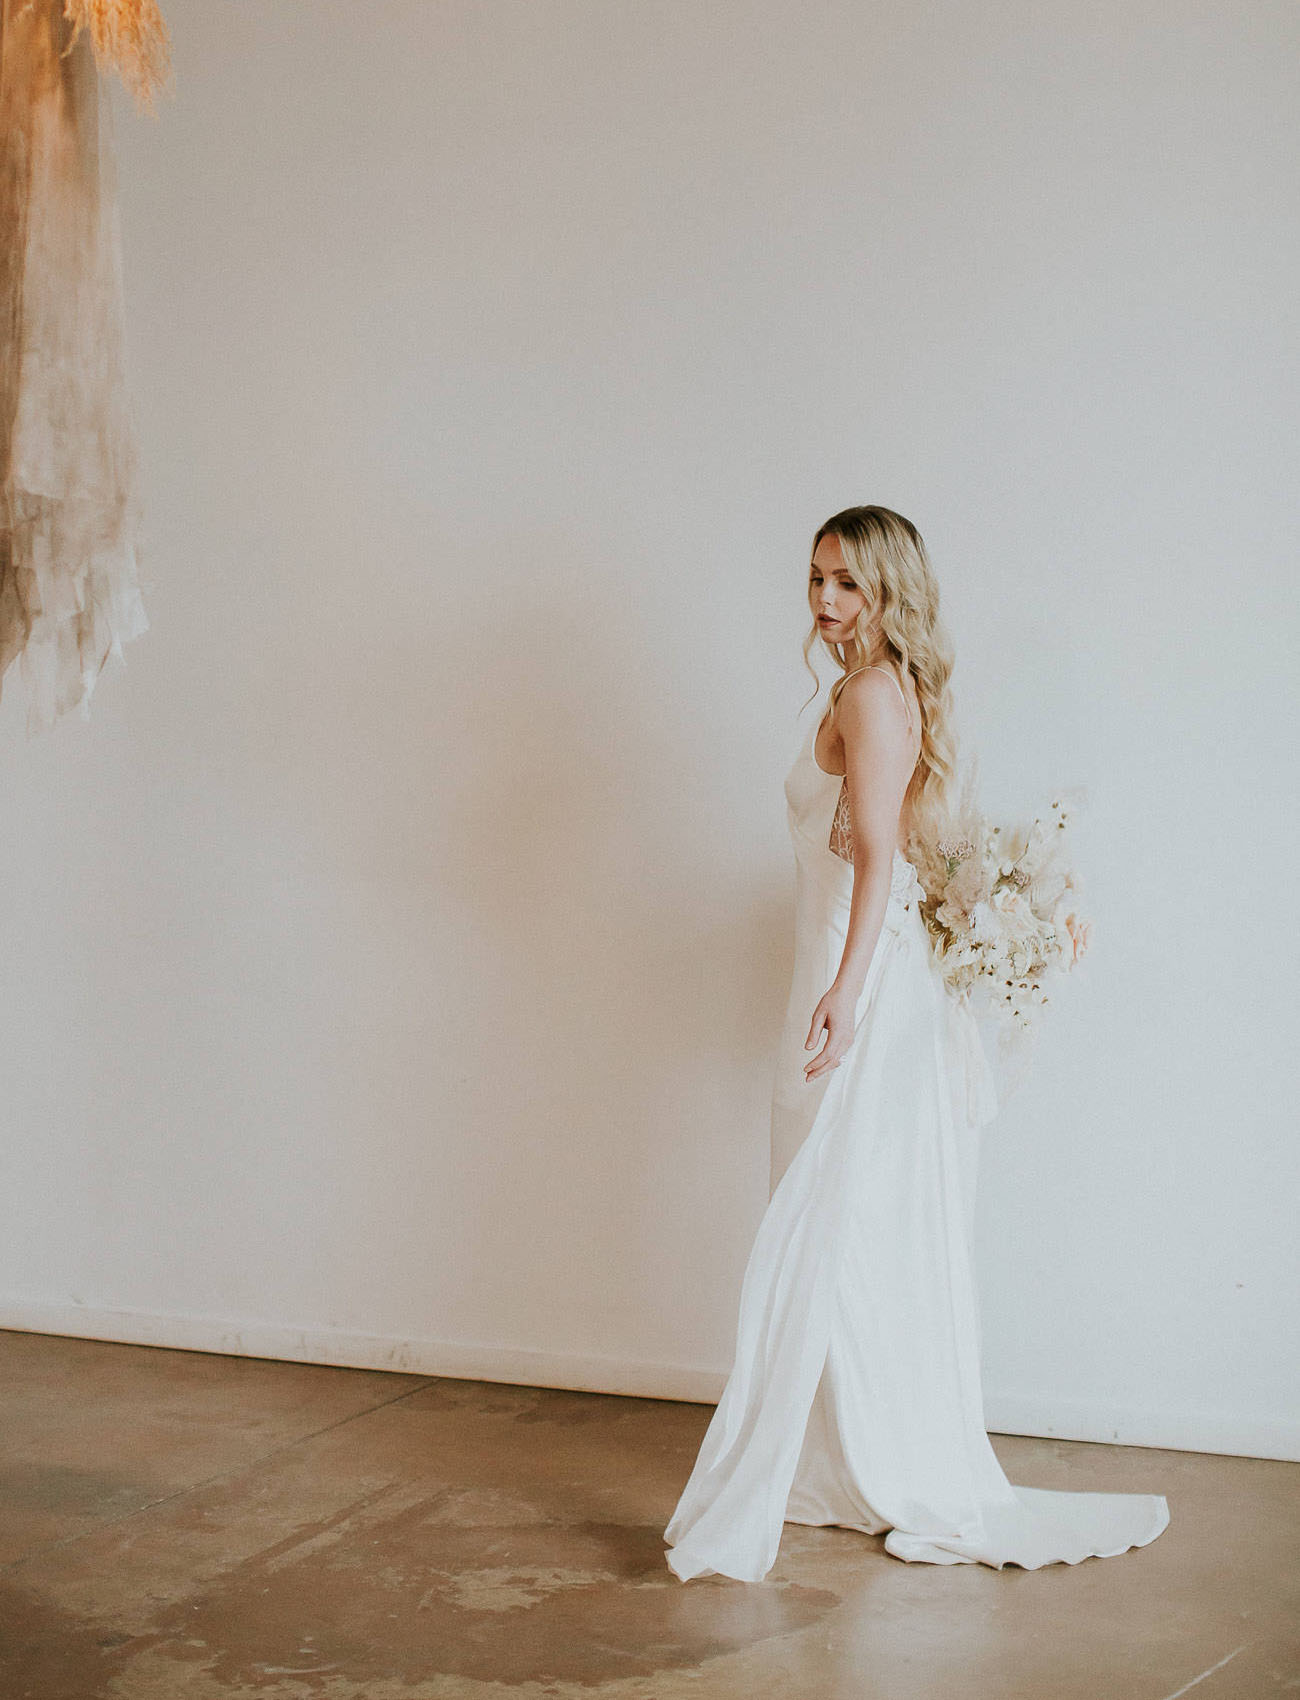 South of France Neutral Wedding Inspiration